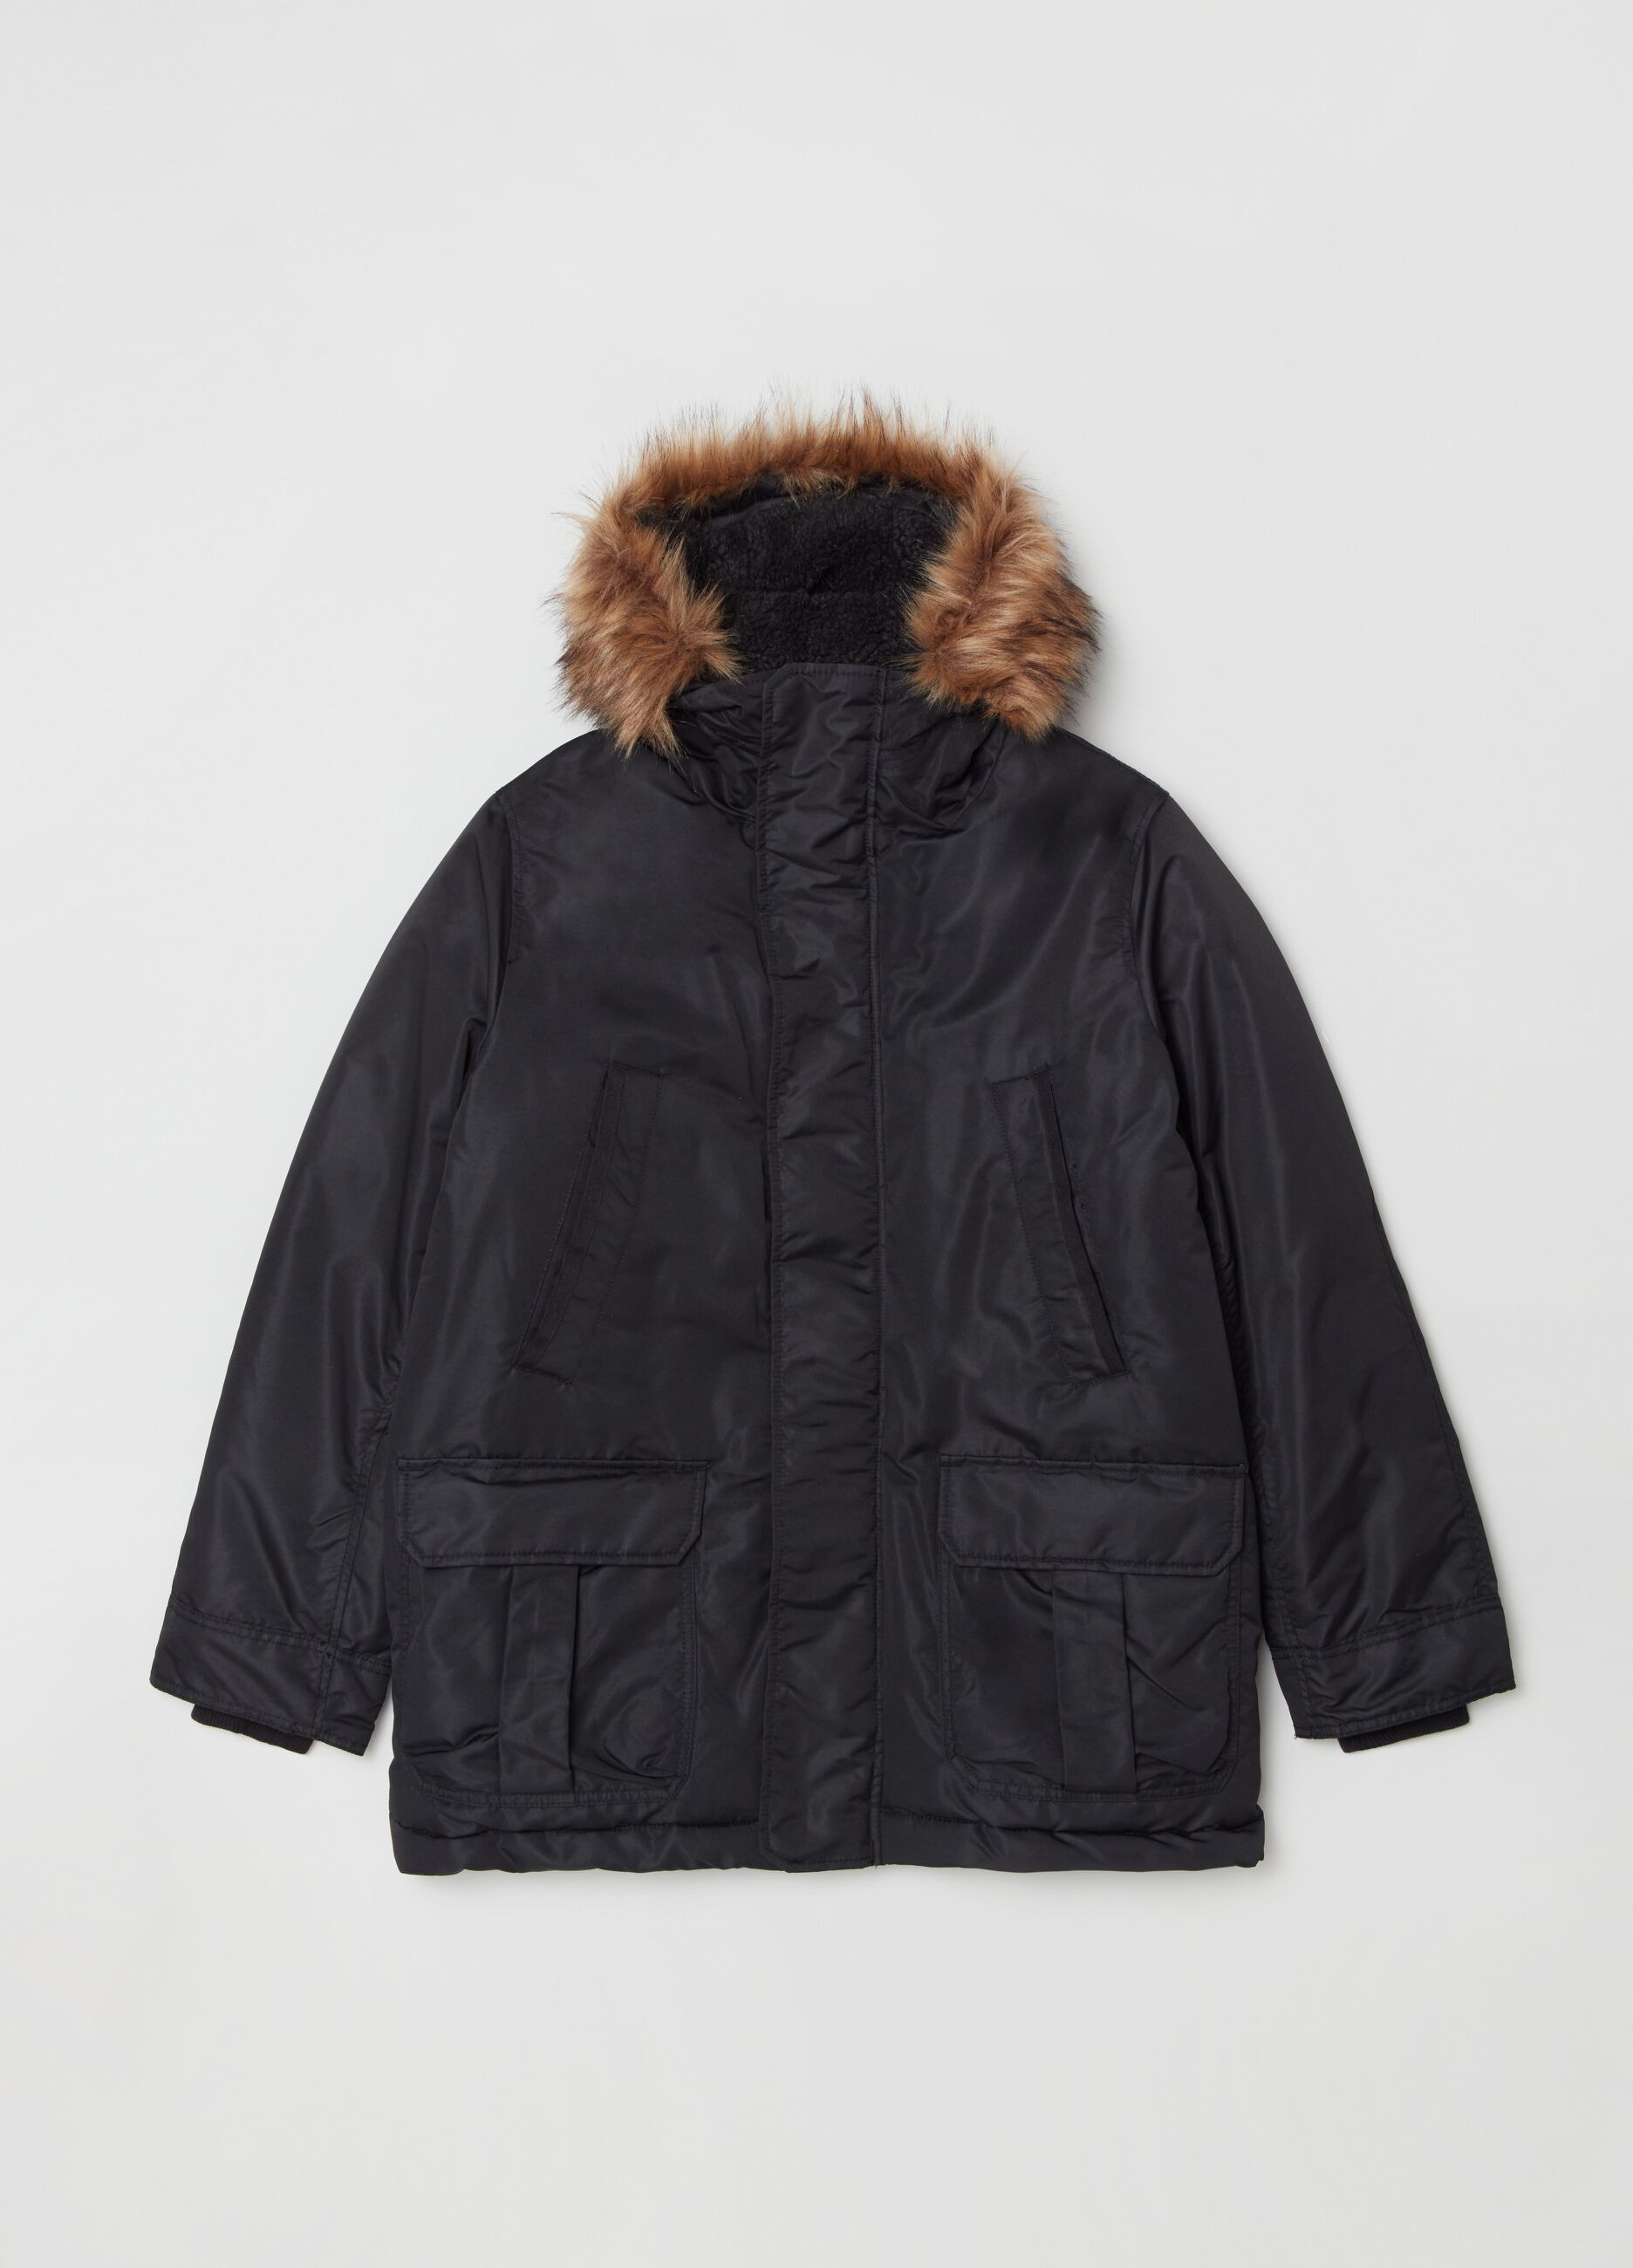 Parka with hood and sherpa lining.